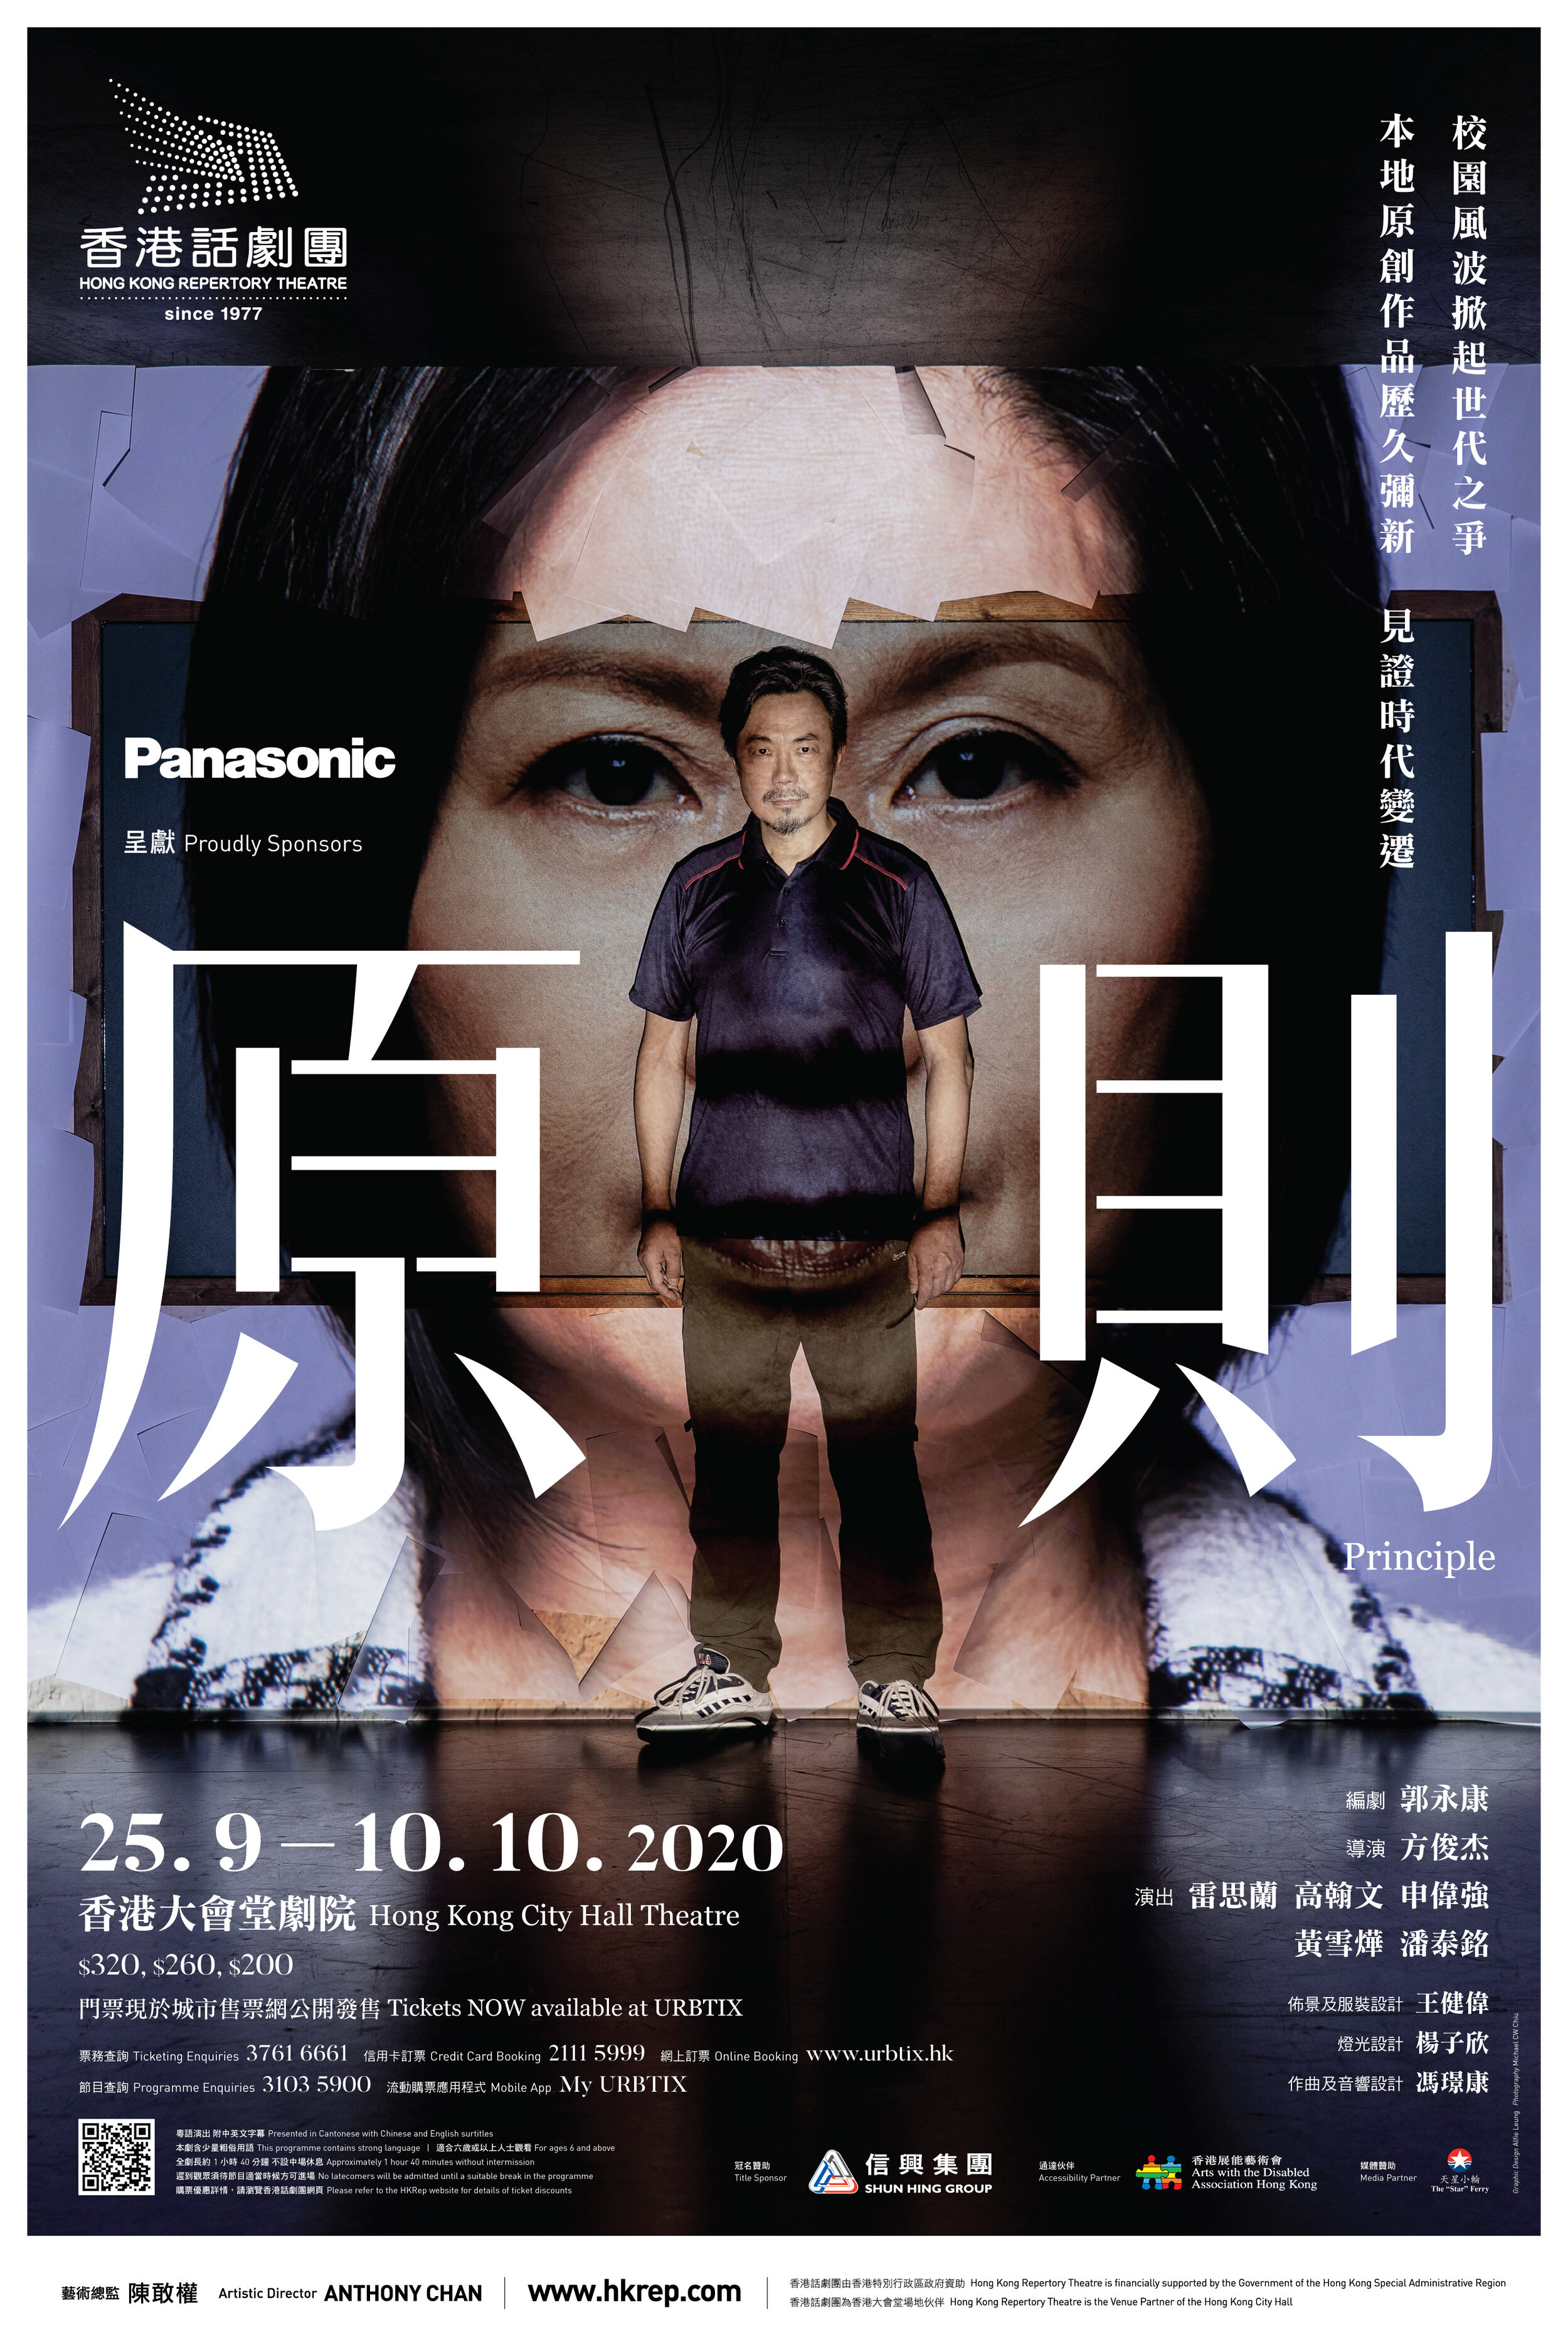 The Principle 原則 Poster for HKREP 